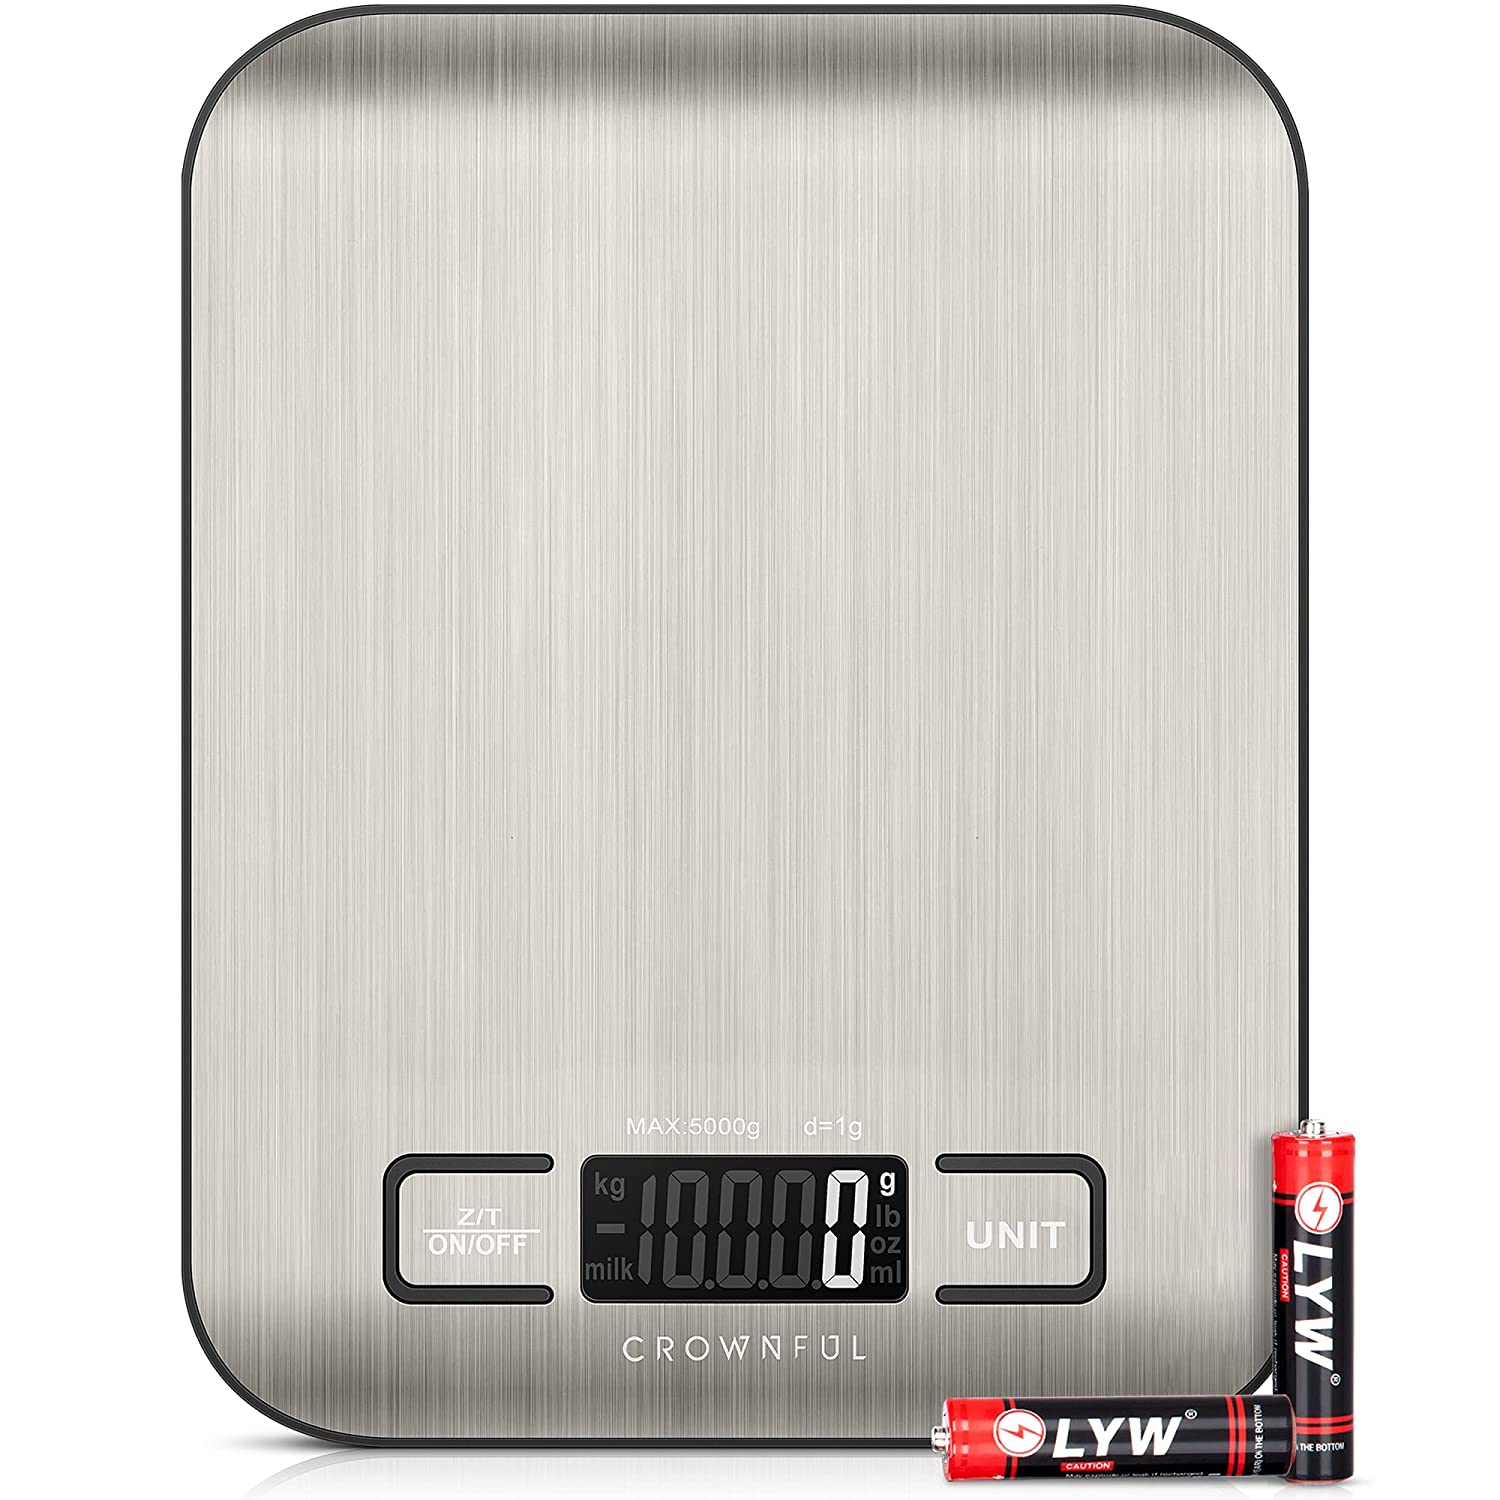 CROWNFUL Compact Stainless Steel Food Scale